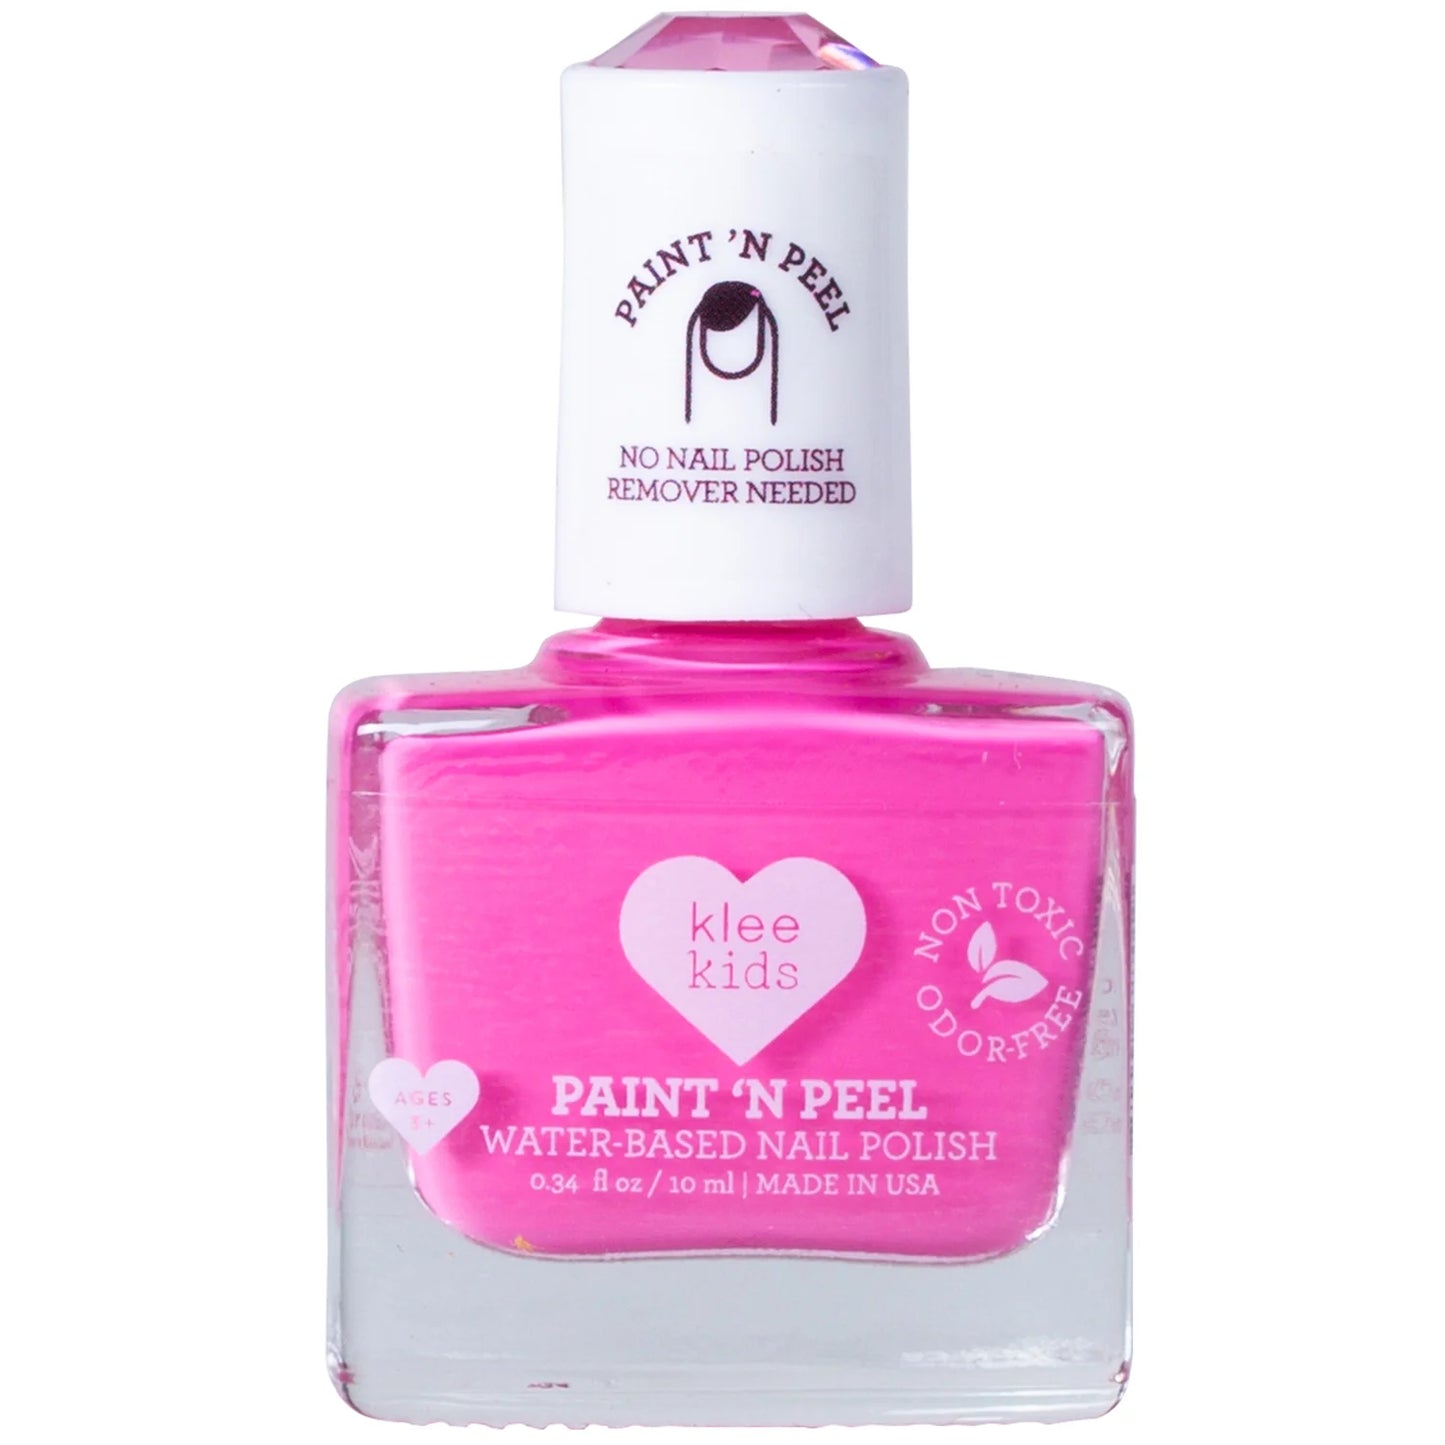 Paint 'N Peel Non-Toxic Water Based Nail Polish for Kids